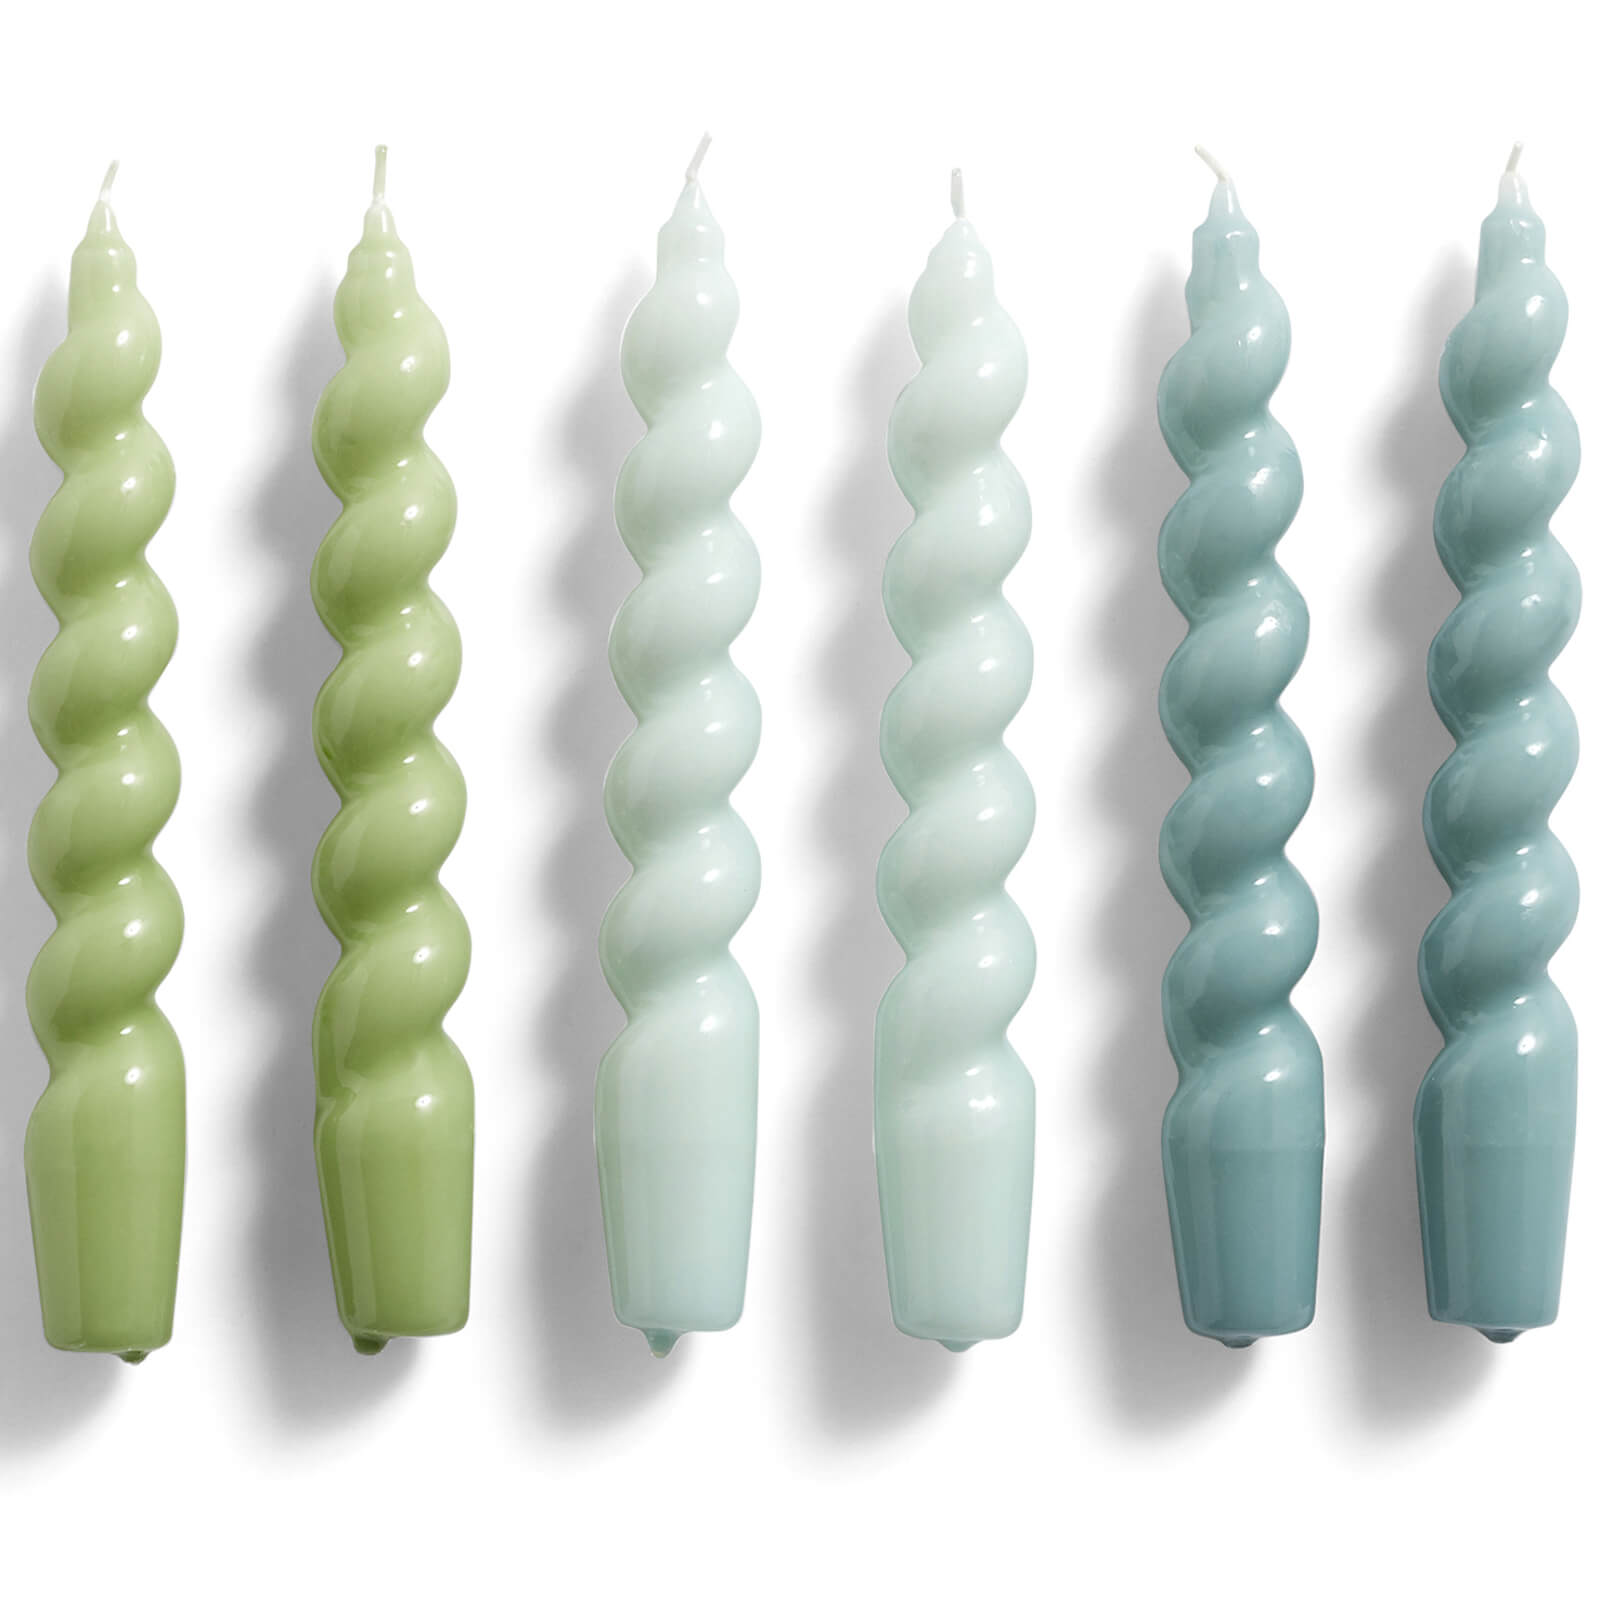 HAY Candle Spiral Set of 6 - Green/Blue/Teal